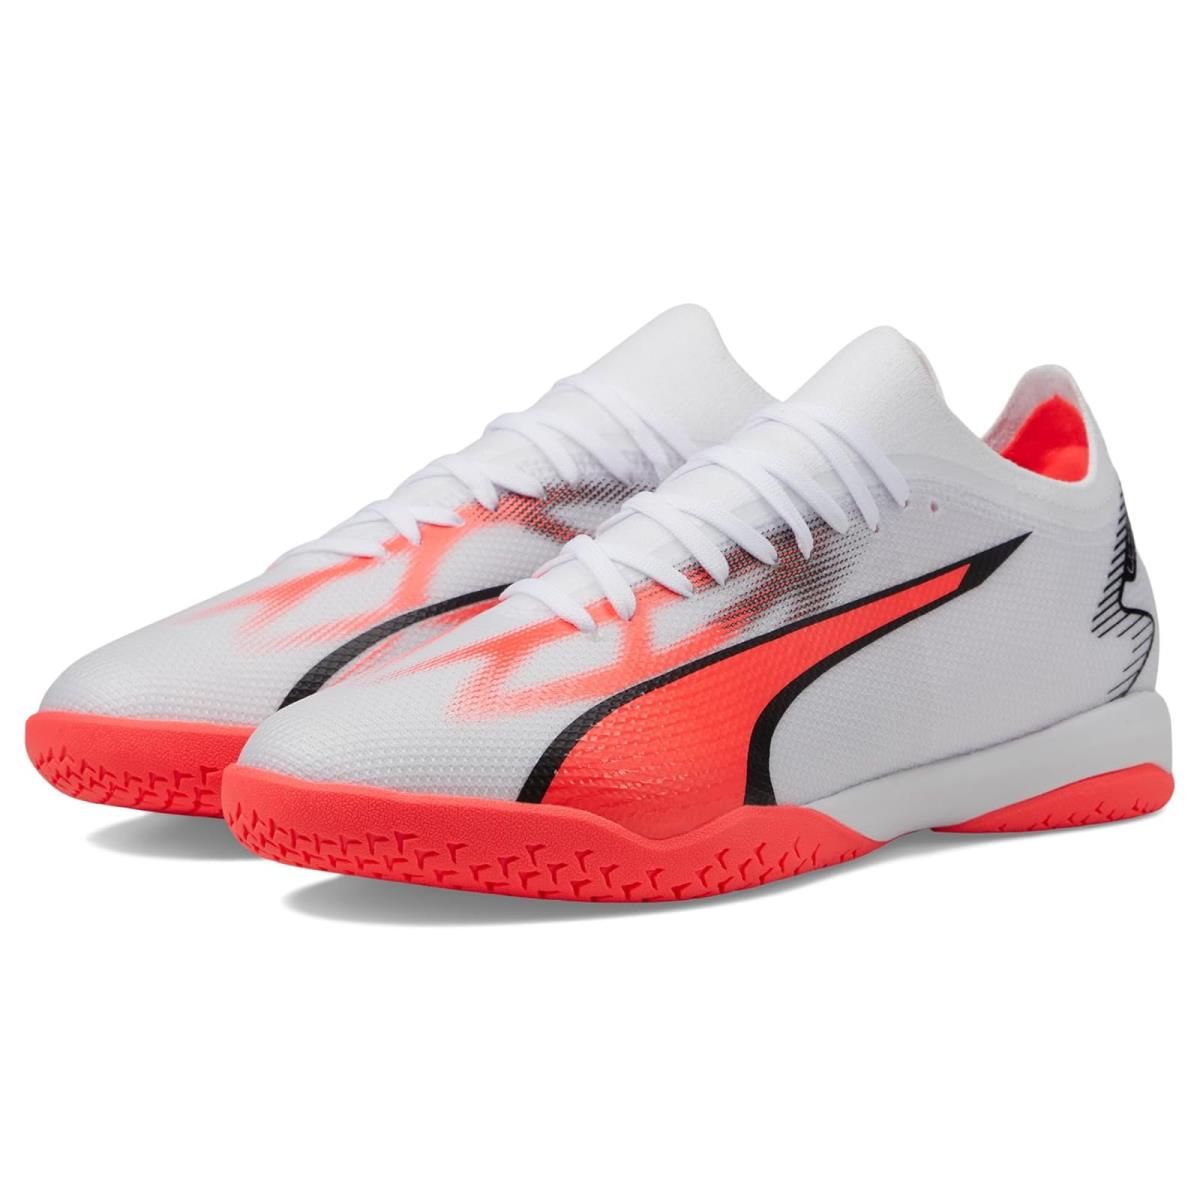 Man`s Sneakers Athletic Shoes Puma Ultra Match Indoor Training PUMA White/PUMA Black/Fire Orchid